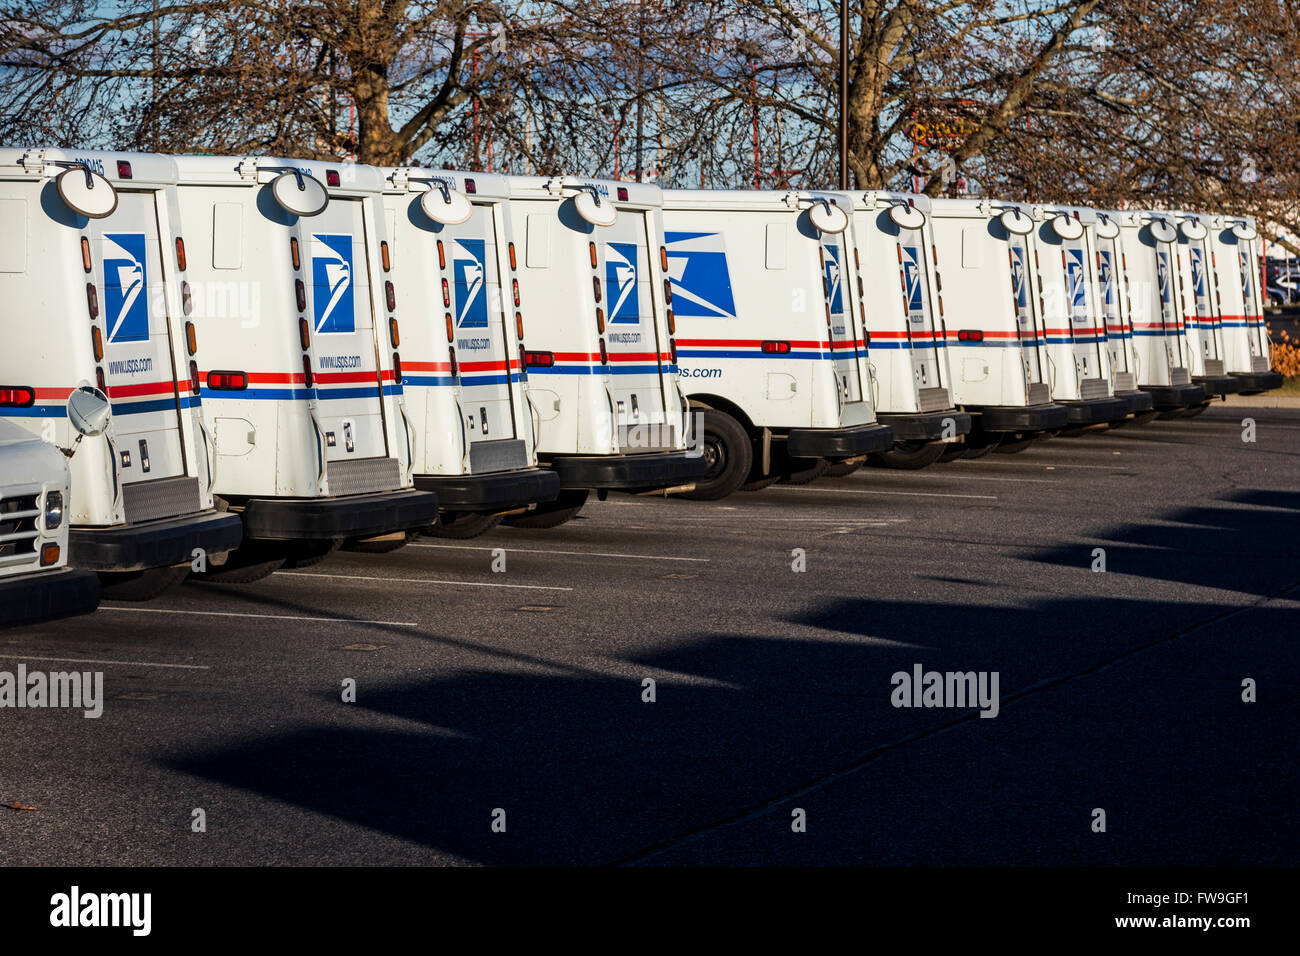 row of parked United States Postal Service vans Stock Photo